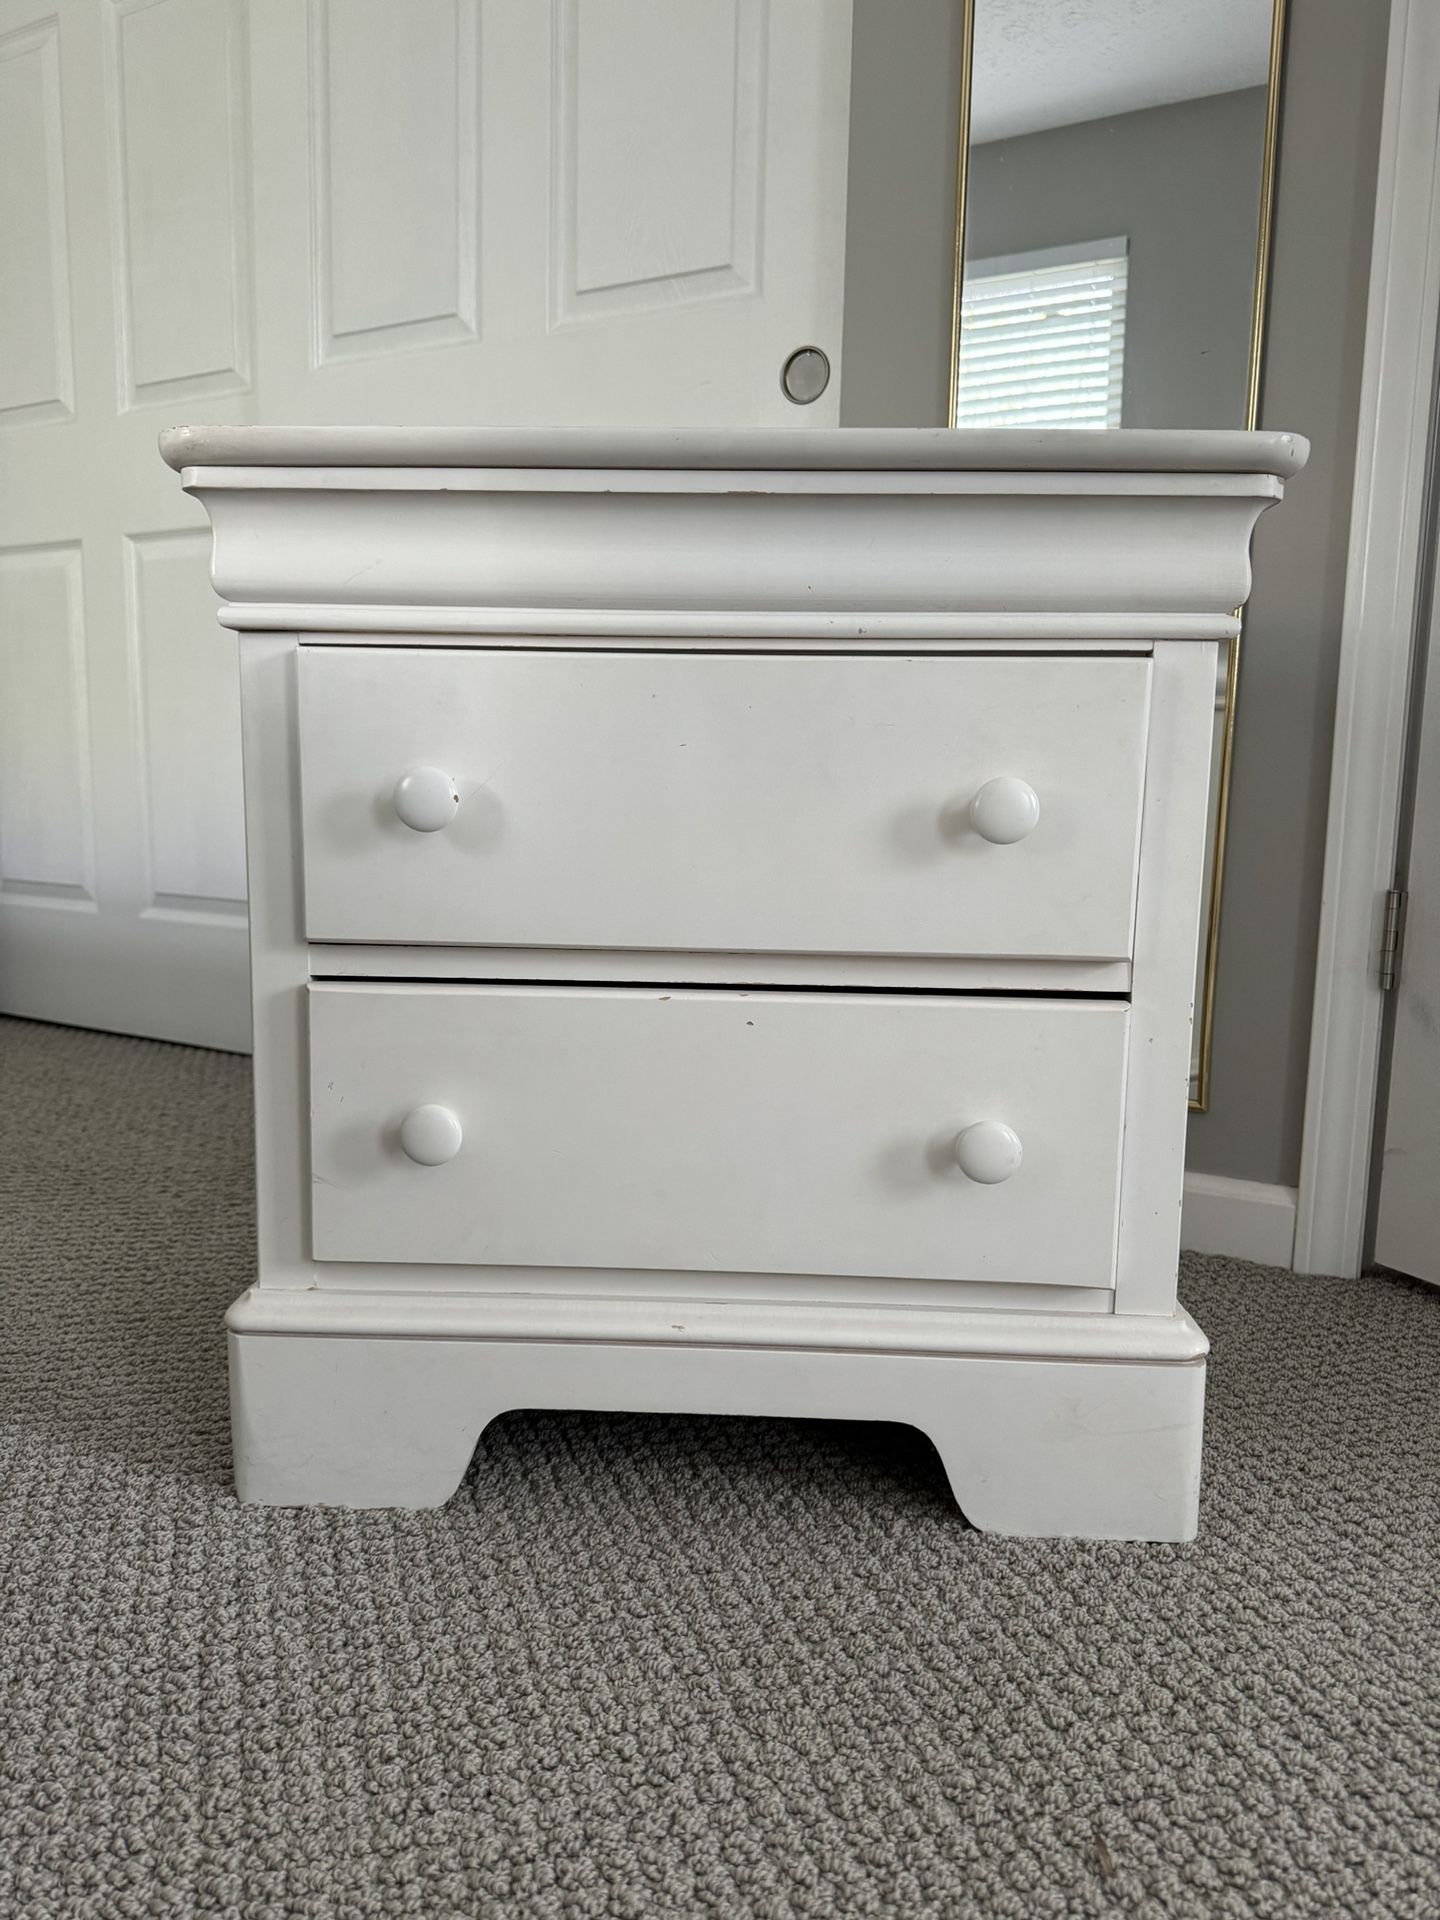 White Solid Wood Nightstand 